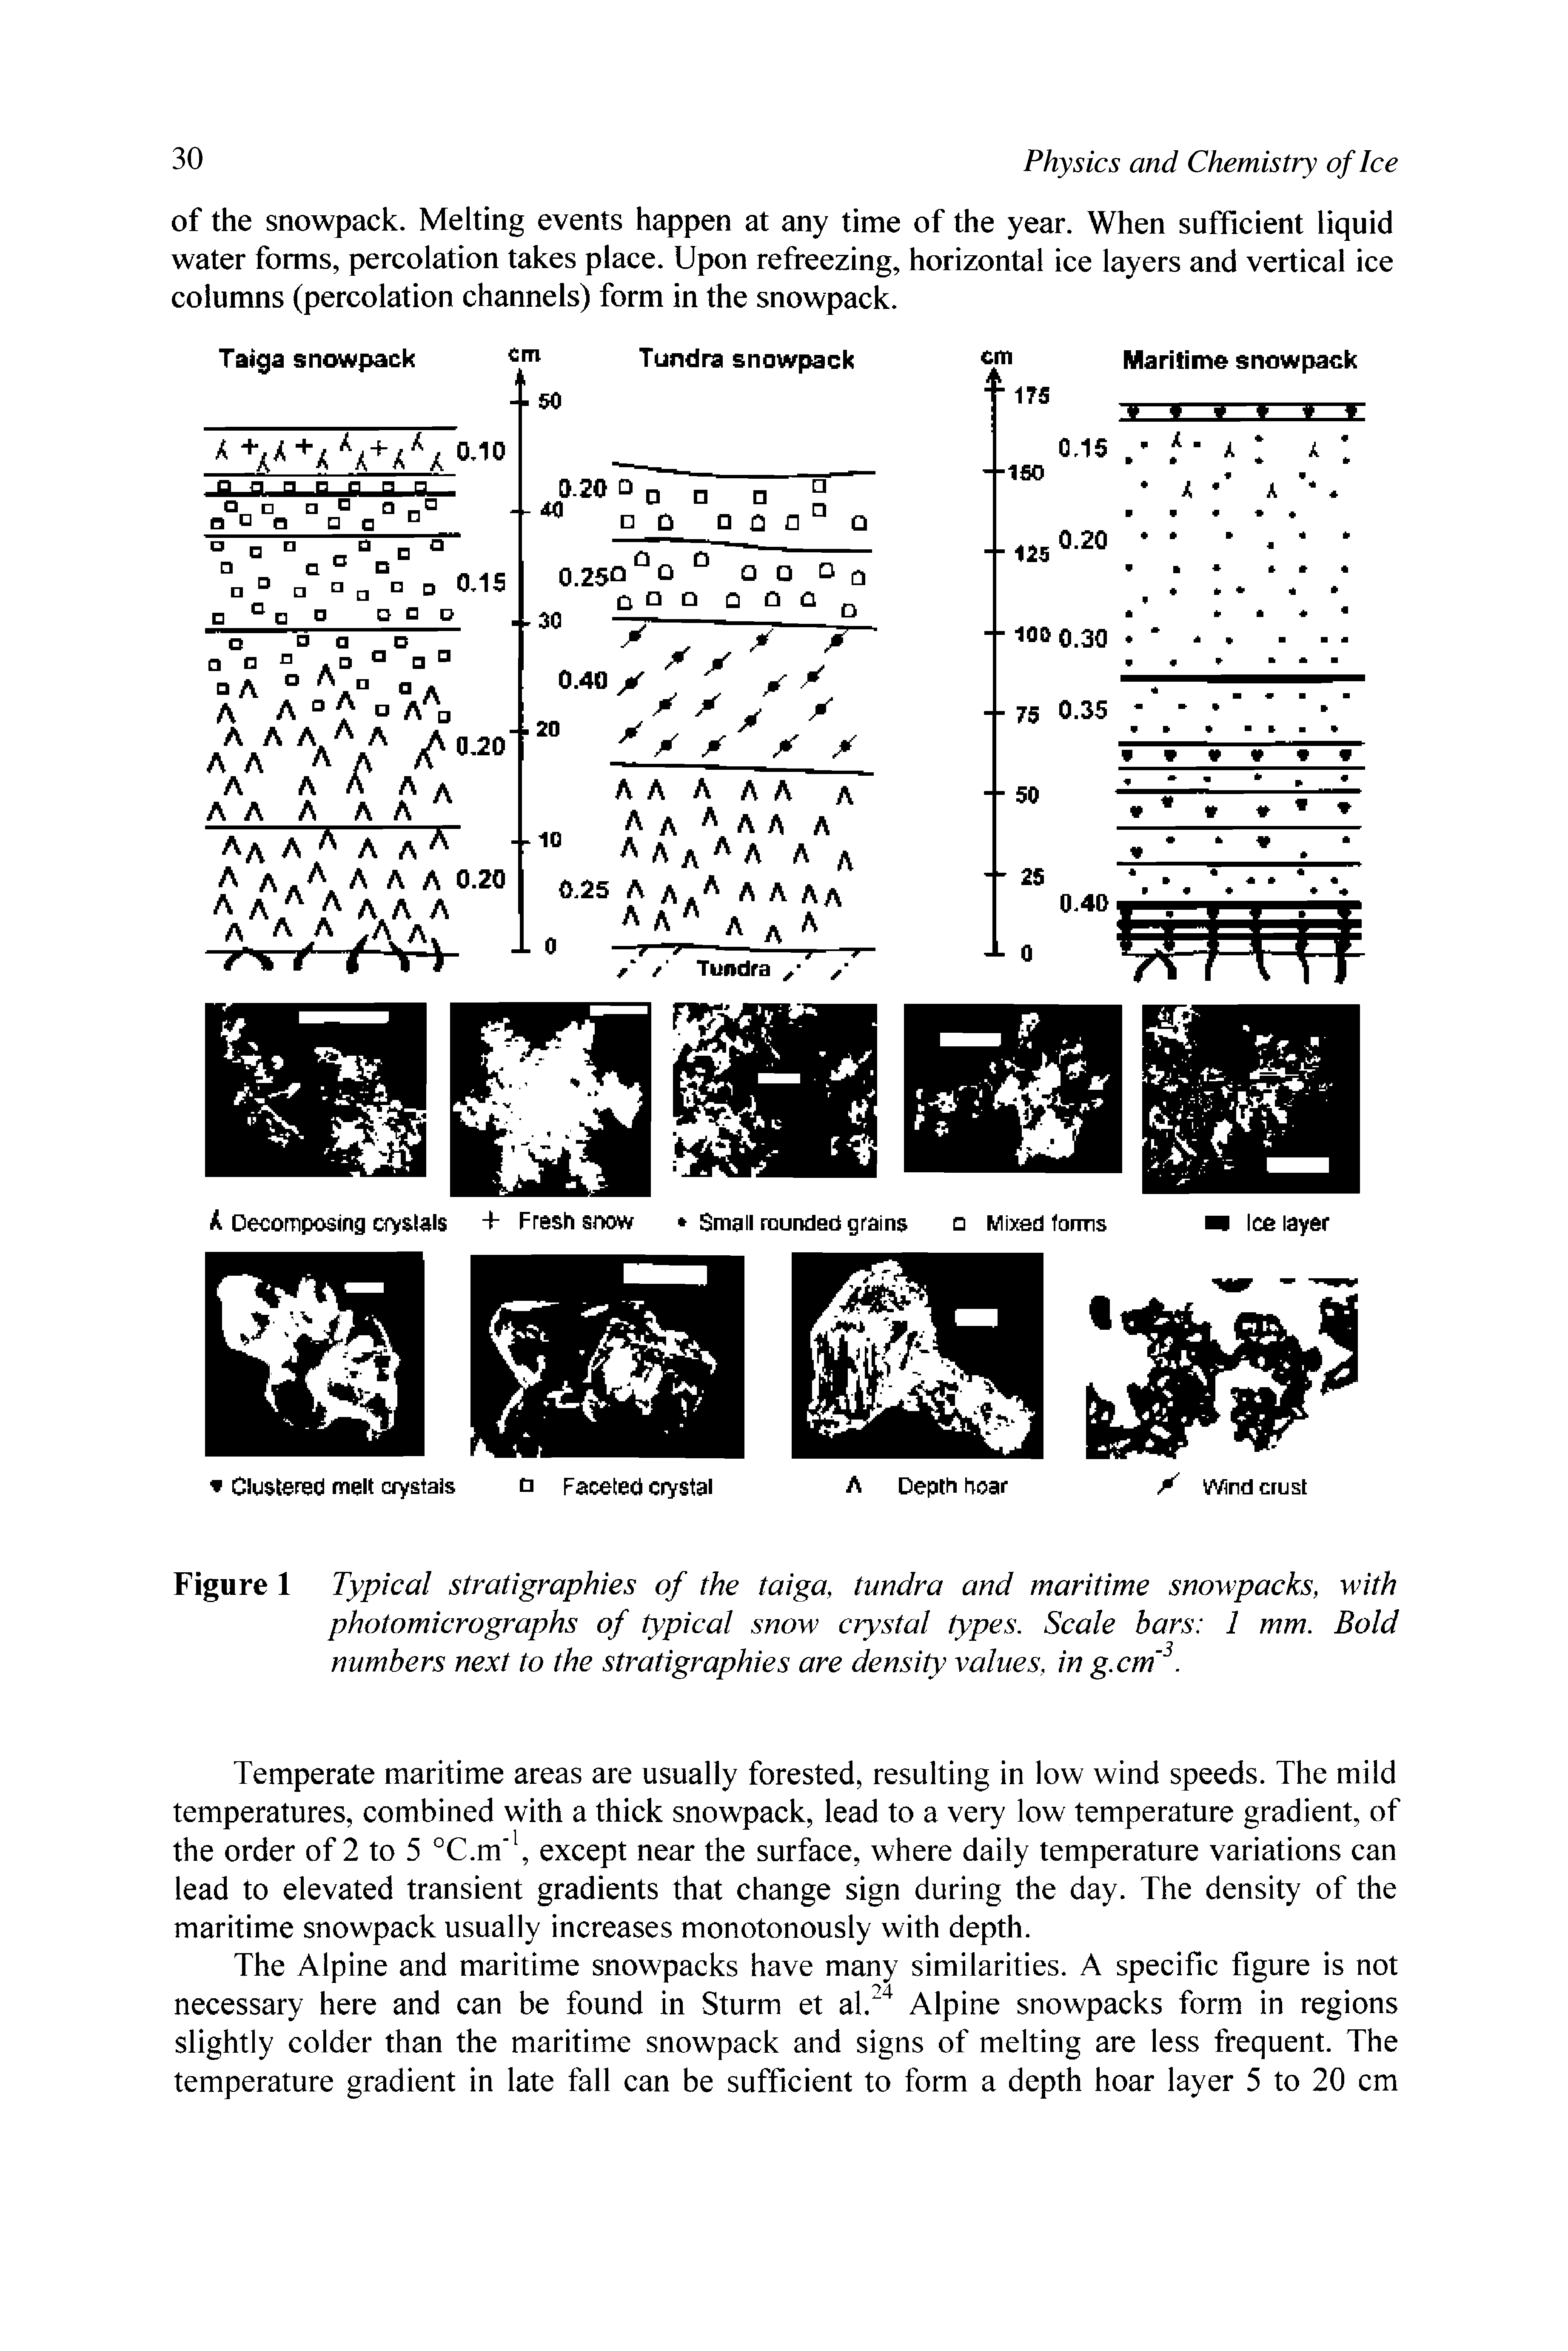 Figure 1 Typical stratigraphies of the taiga, tundra and maritime snowpacks, with photomicrographs of typical snow crystal types. Scale bars 1 mm. Bold numbers next to the stratigraphies are density values, in g.cm. ...